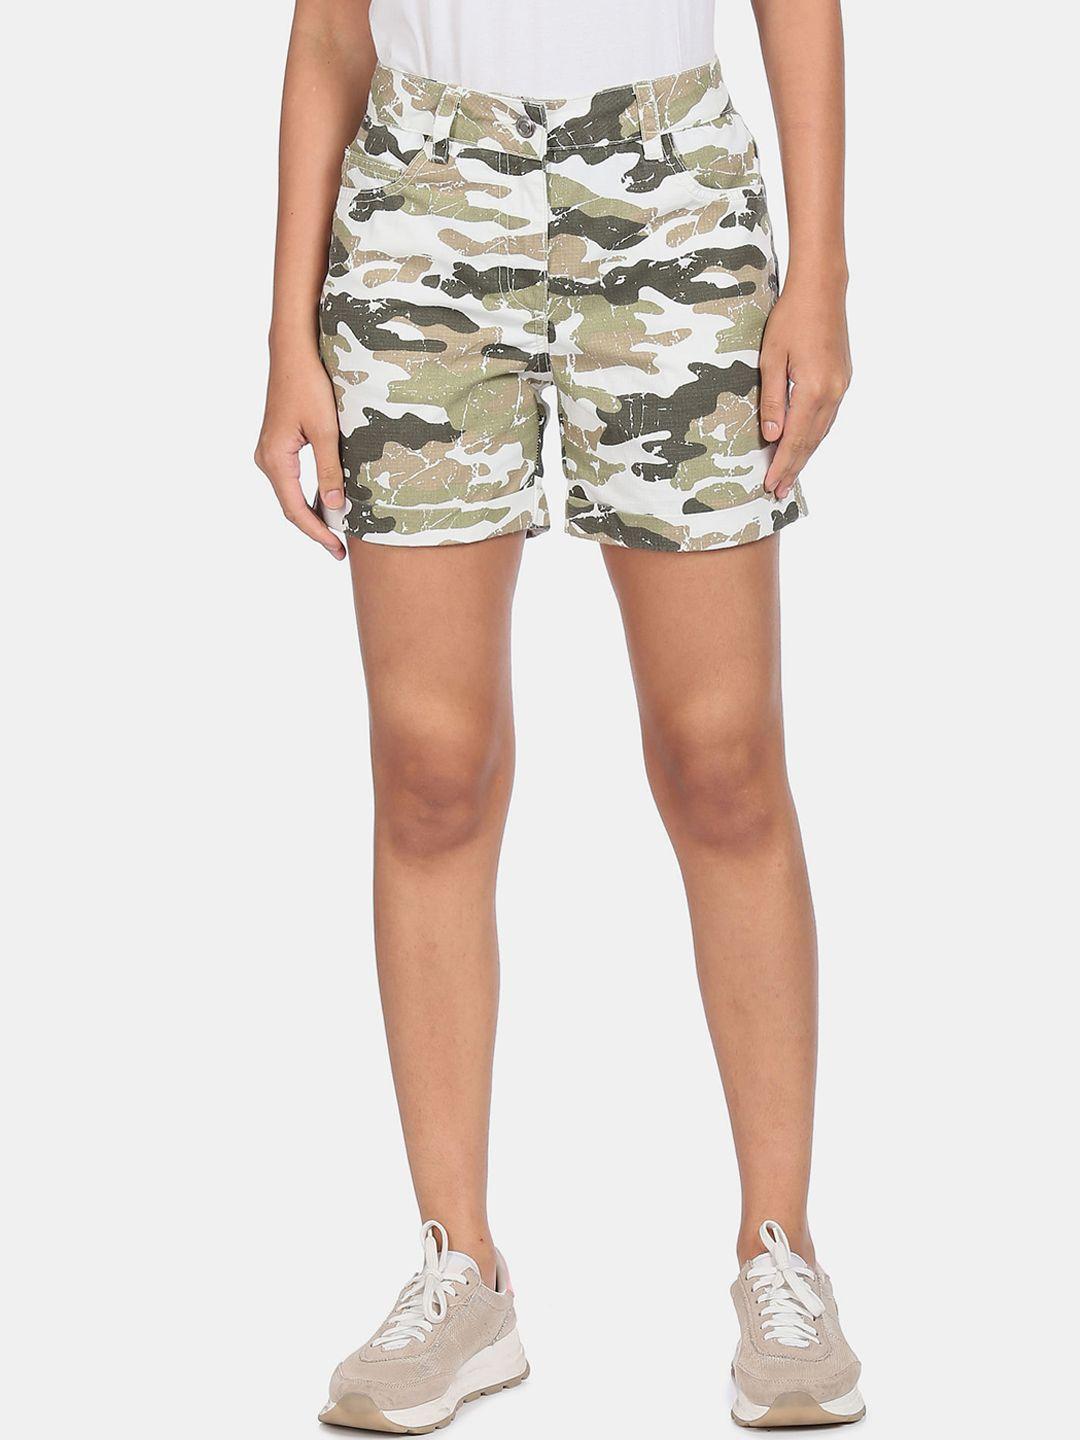 sugr woman olive & green mid rise camo print shorts